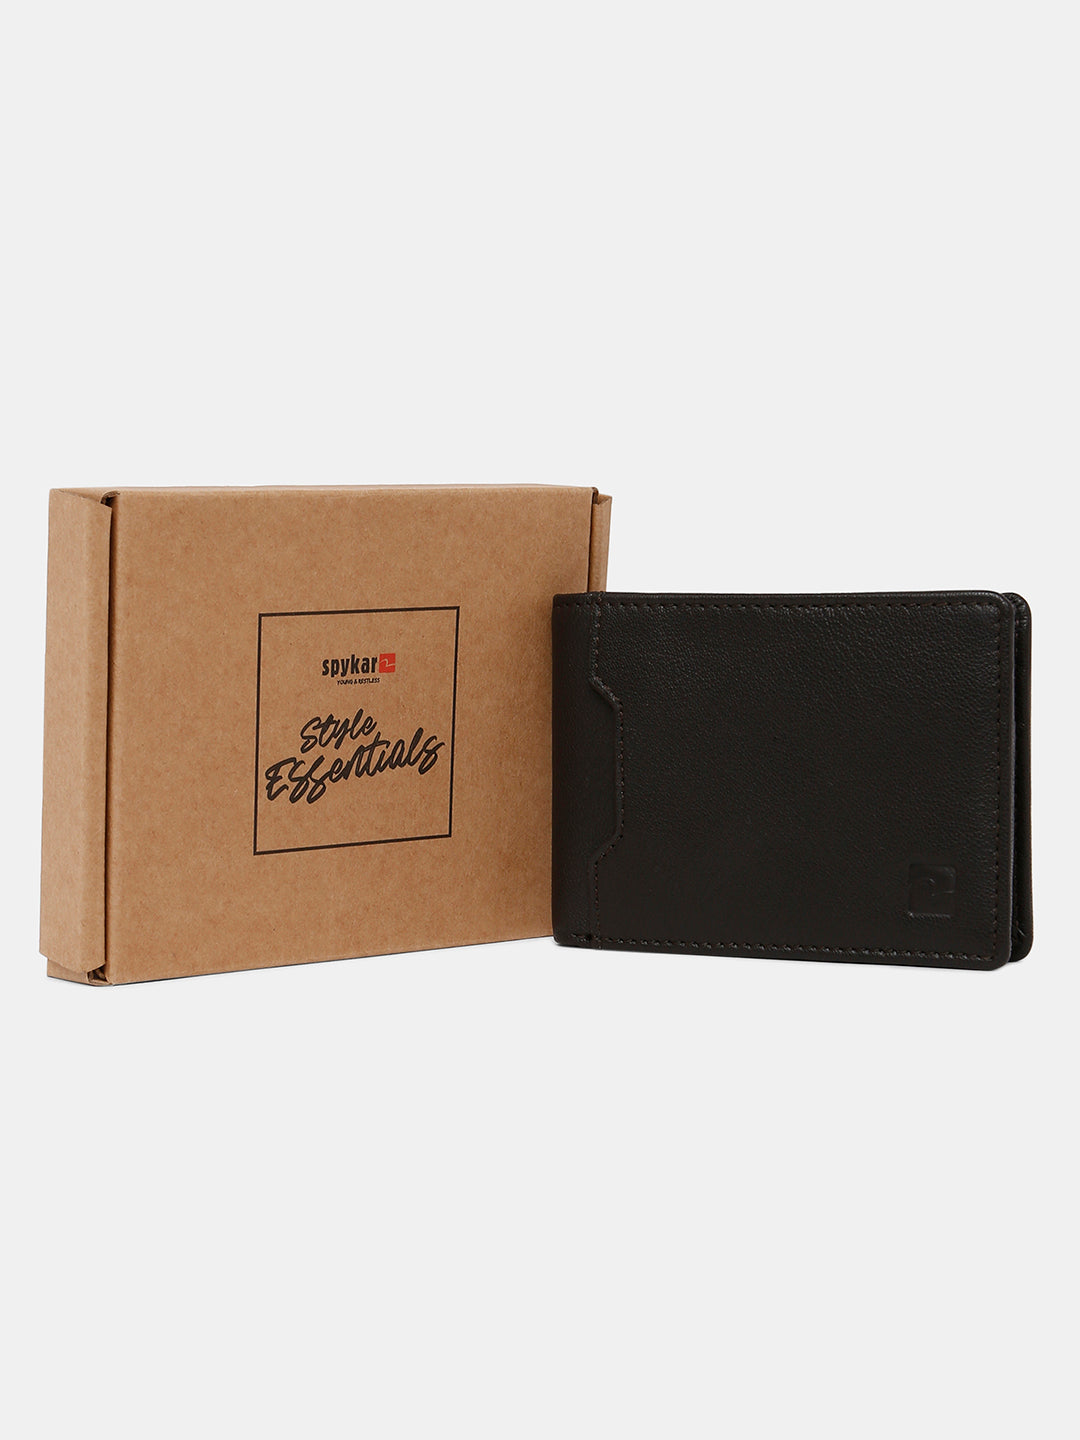 Levis Leather Wallet For Men - Chocolate